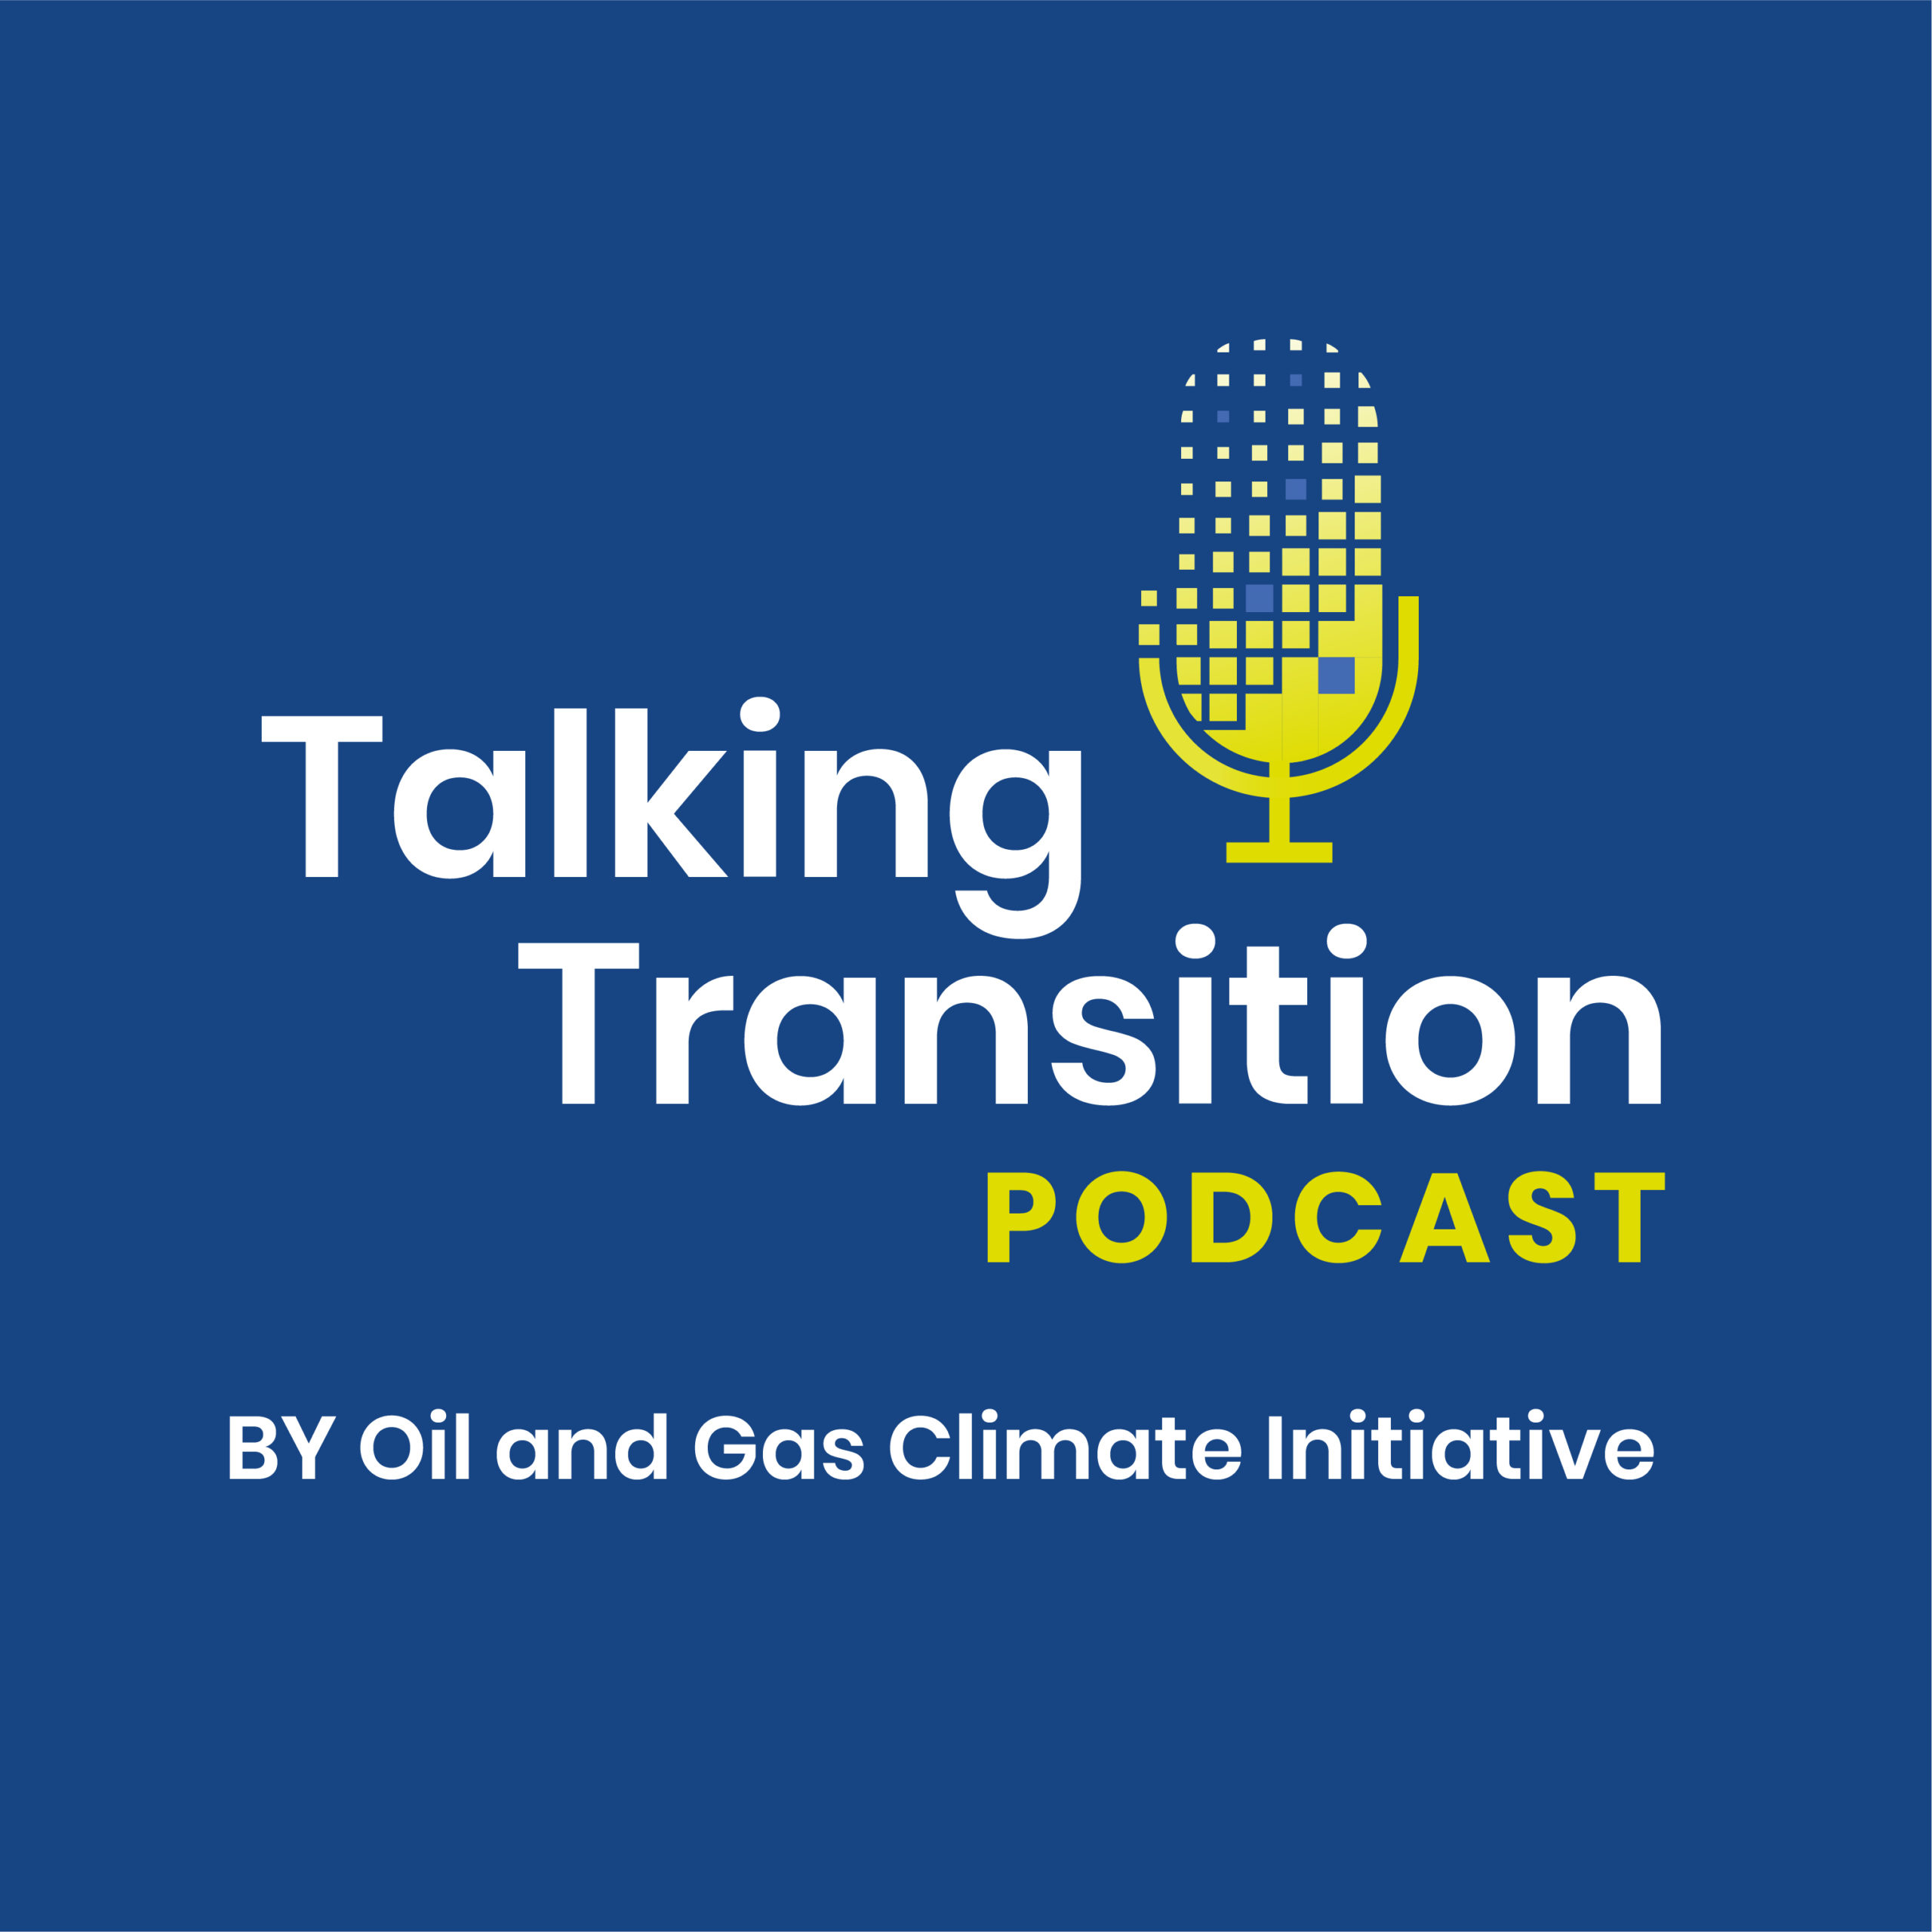 TalkingTransition_Podcast_BY White